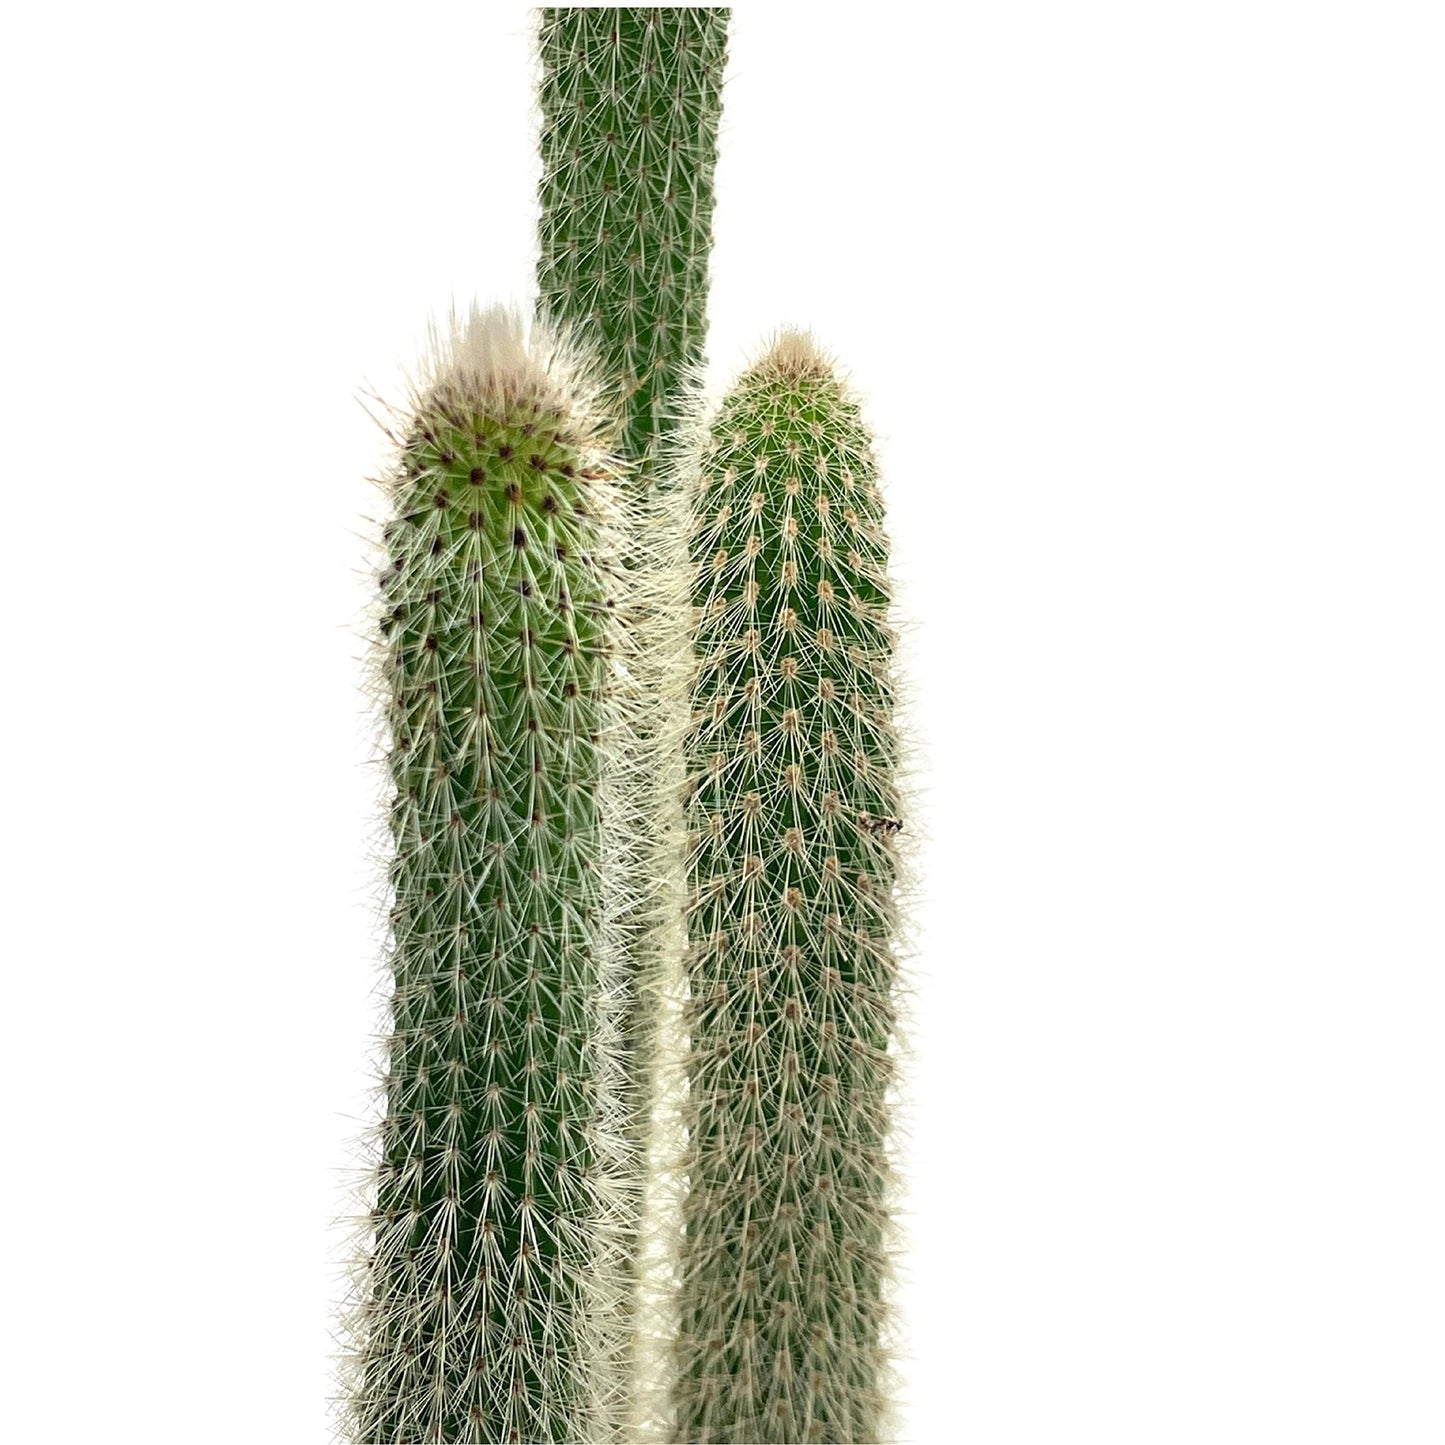 Old Man of The Andes, 6 inch, Huge Cactus, Oreocereus celsianus, Hairy Fuzzy Mountain Cacti